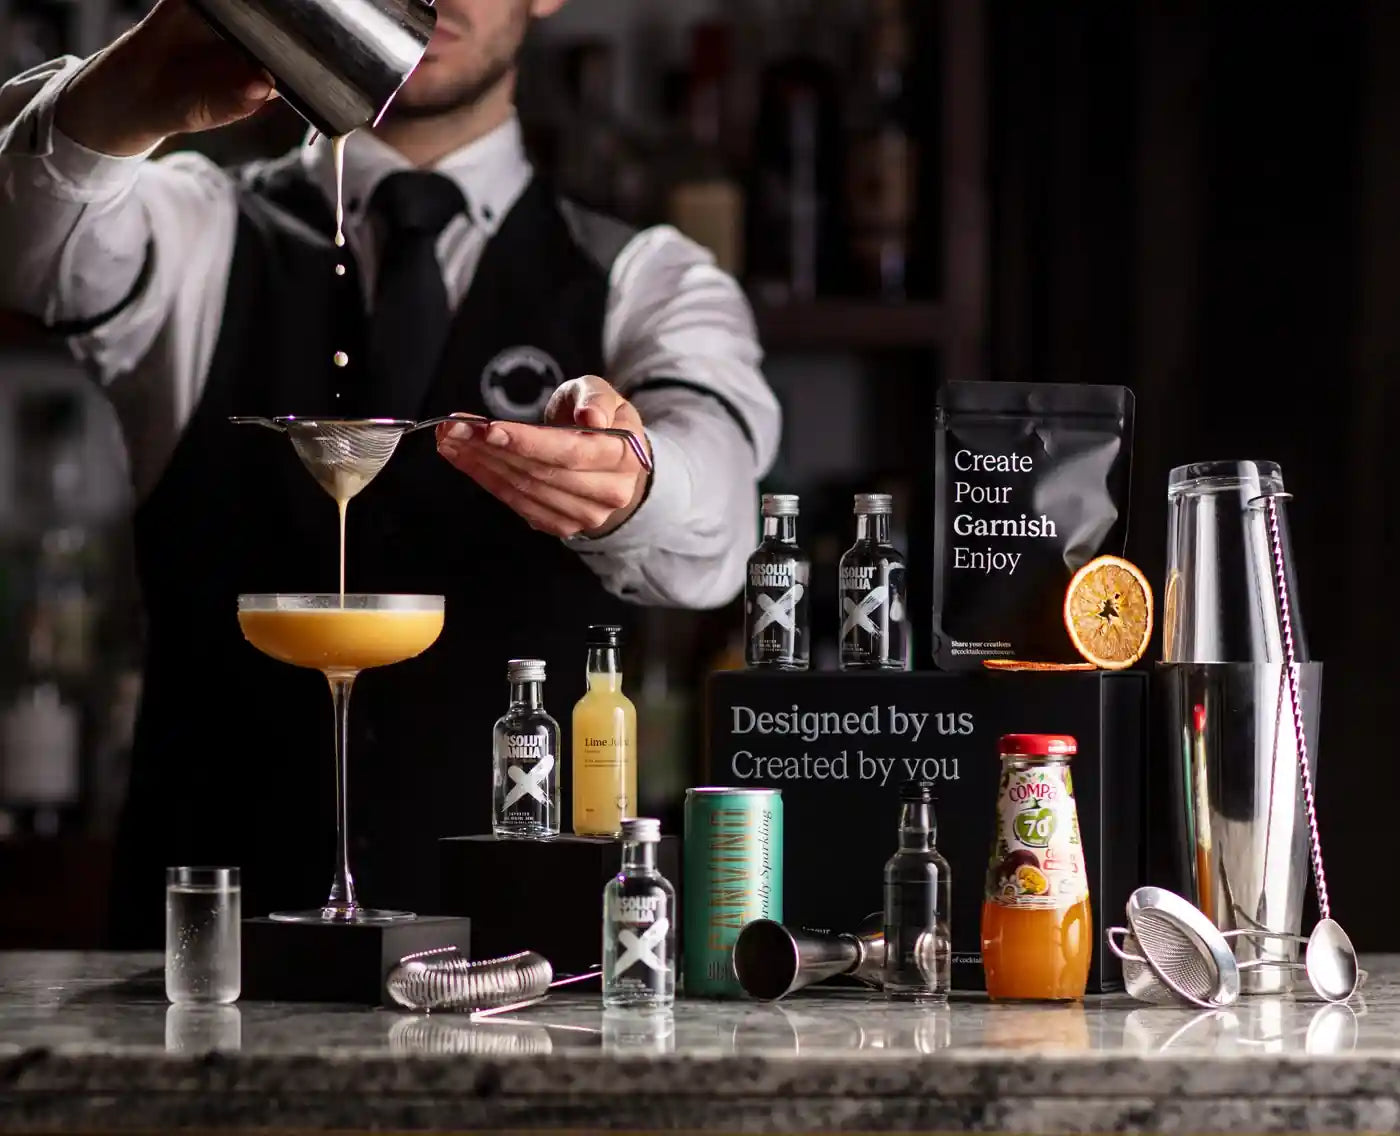 Premium cocktail making kits and gift sets with bar equipment sets delivered